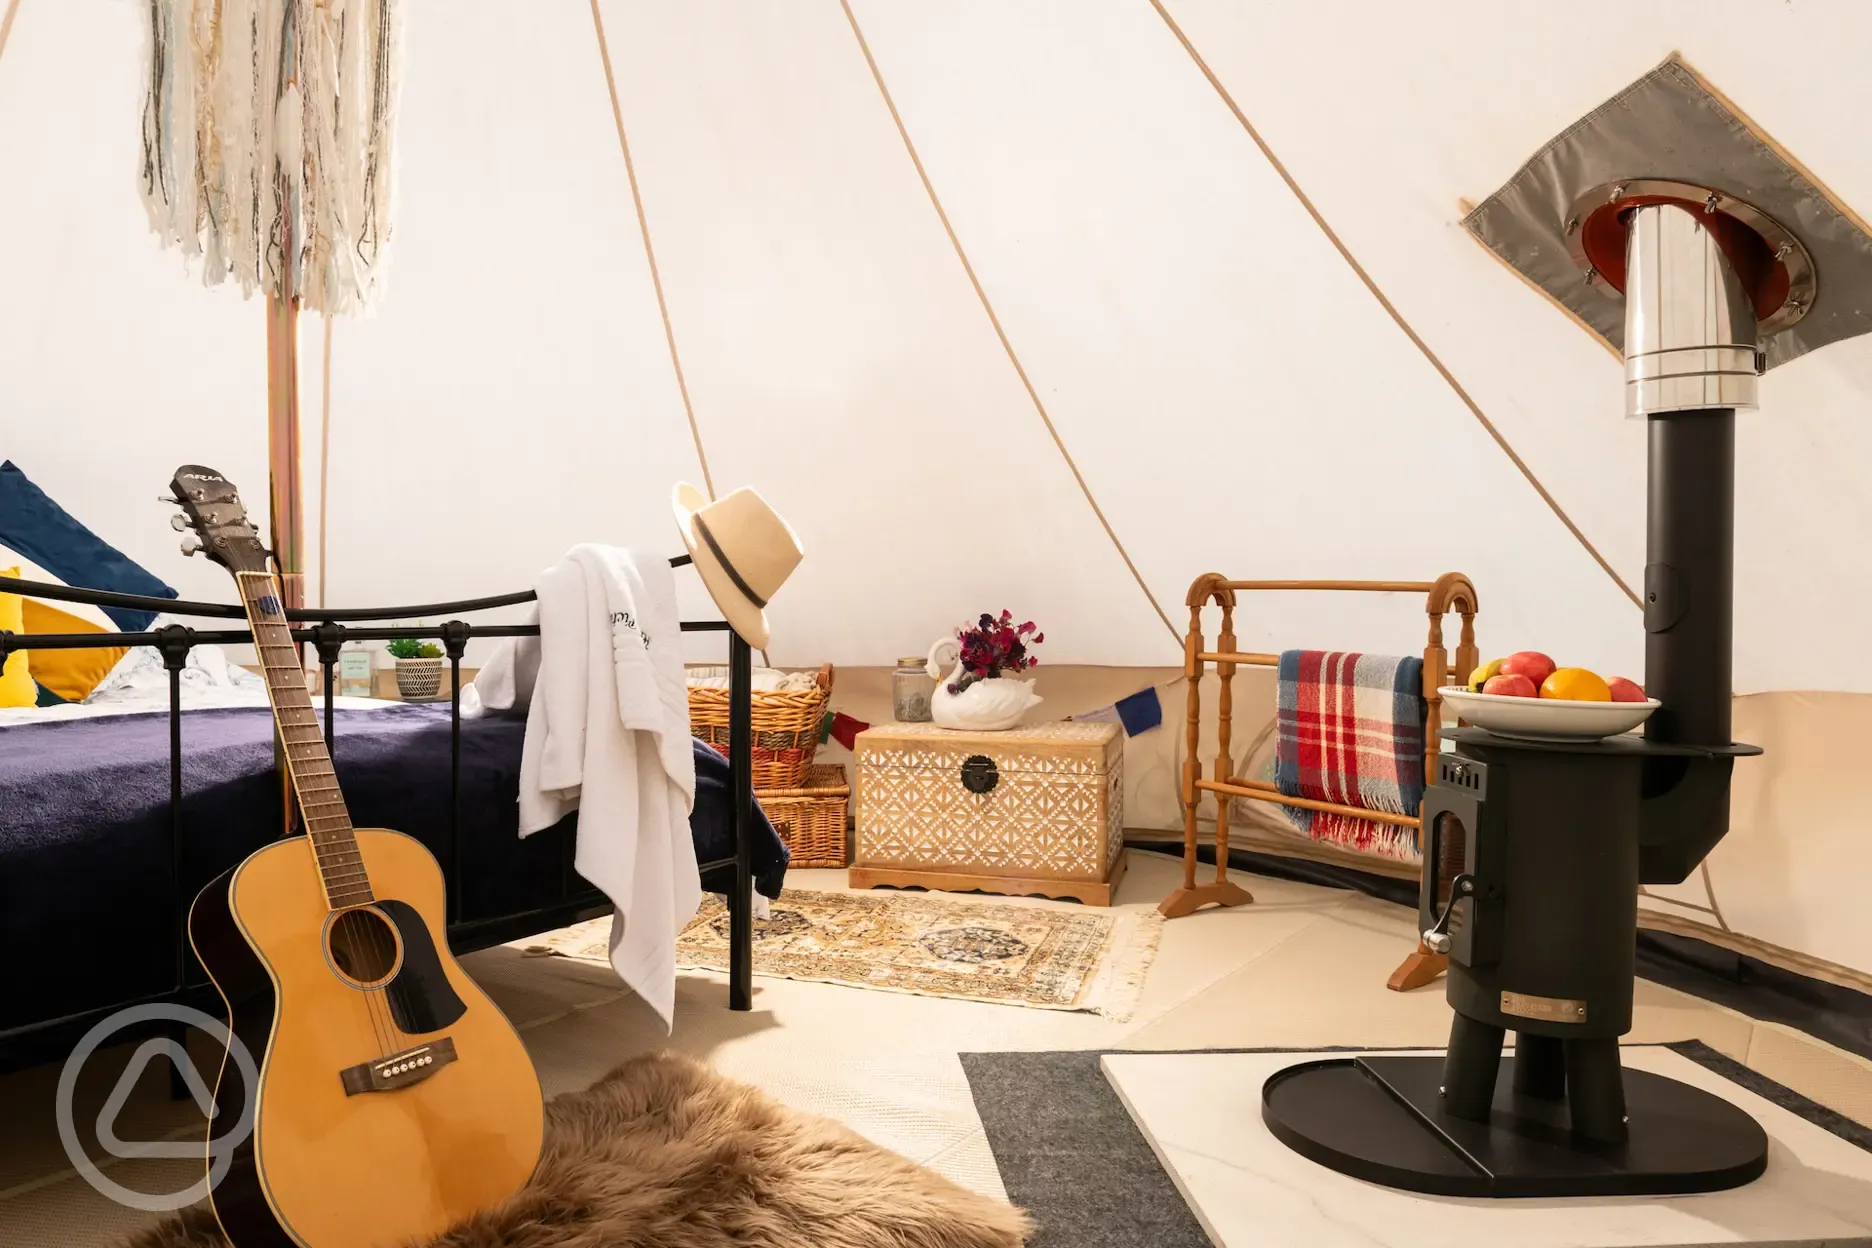 Interior of bell tent with log burner